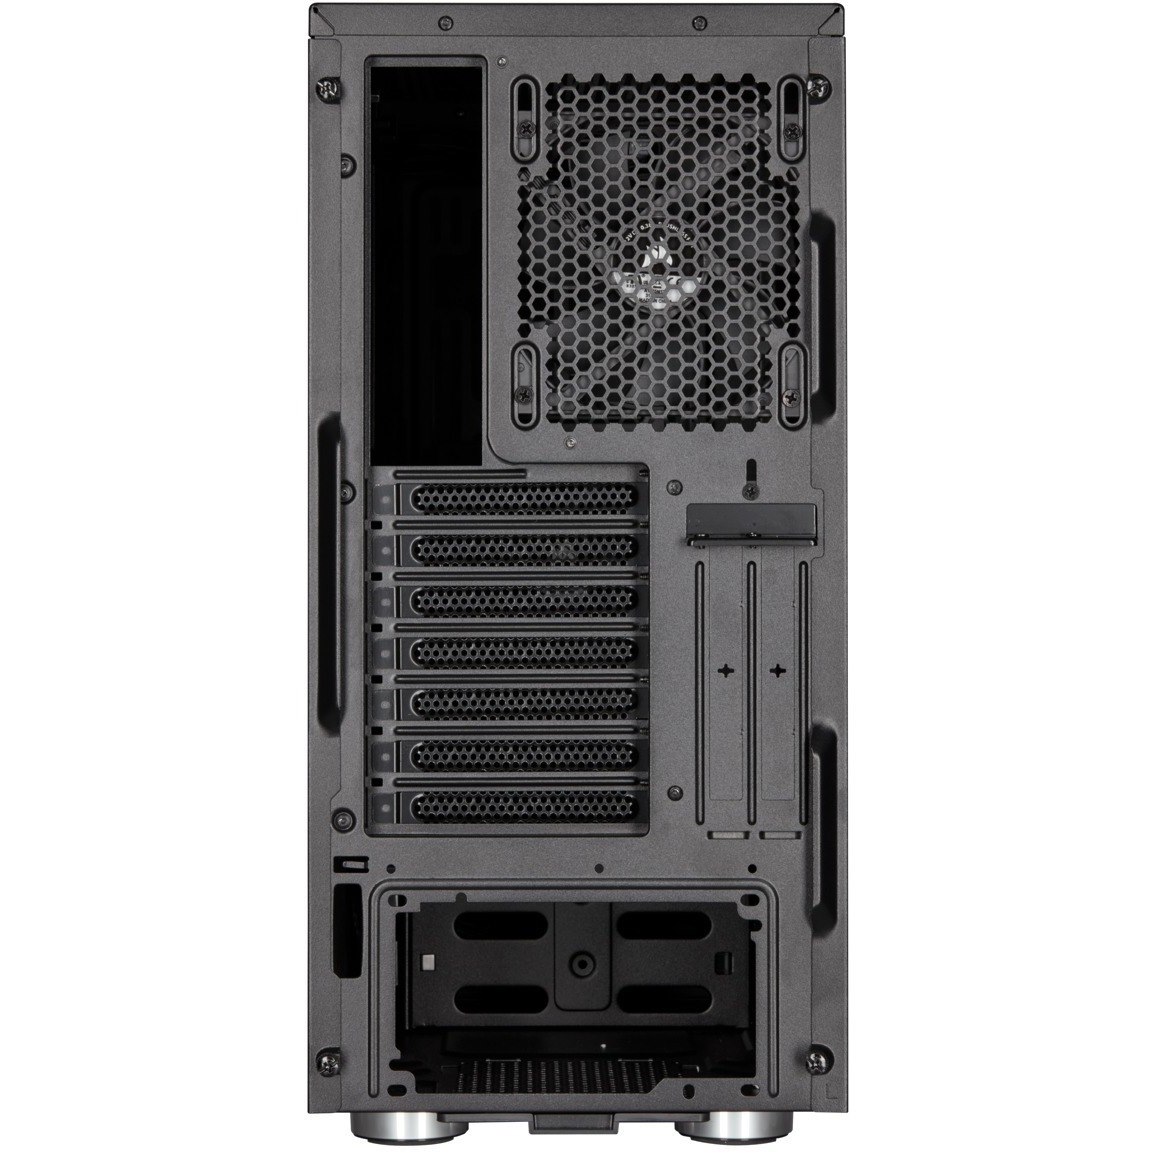 Corsair Carbide 275Q Gaming Computer Case - Mini ITX, Micro ATX, ATX Motherboard Supported - Mid-tower - Steel - Black